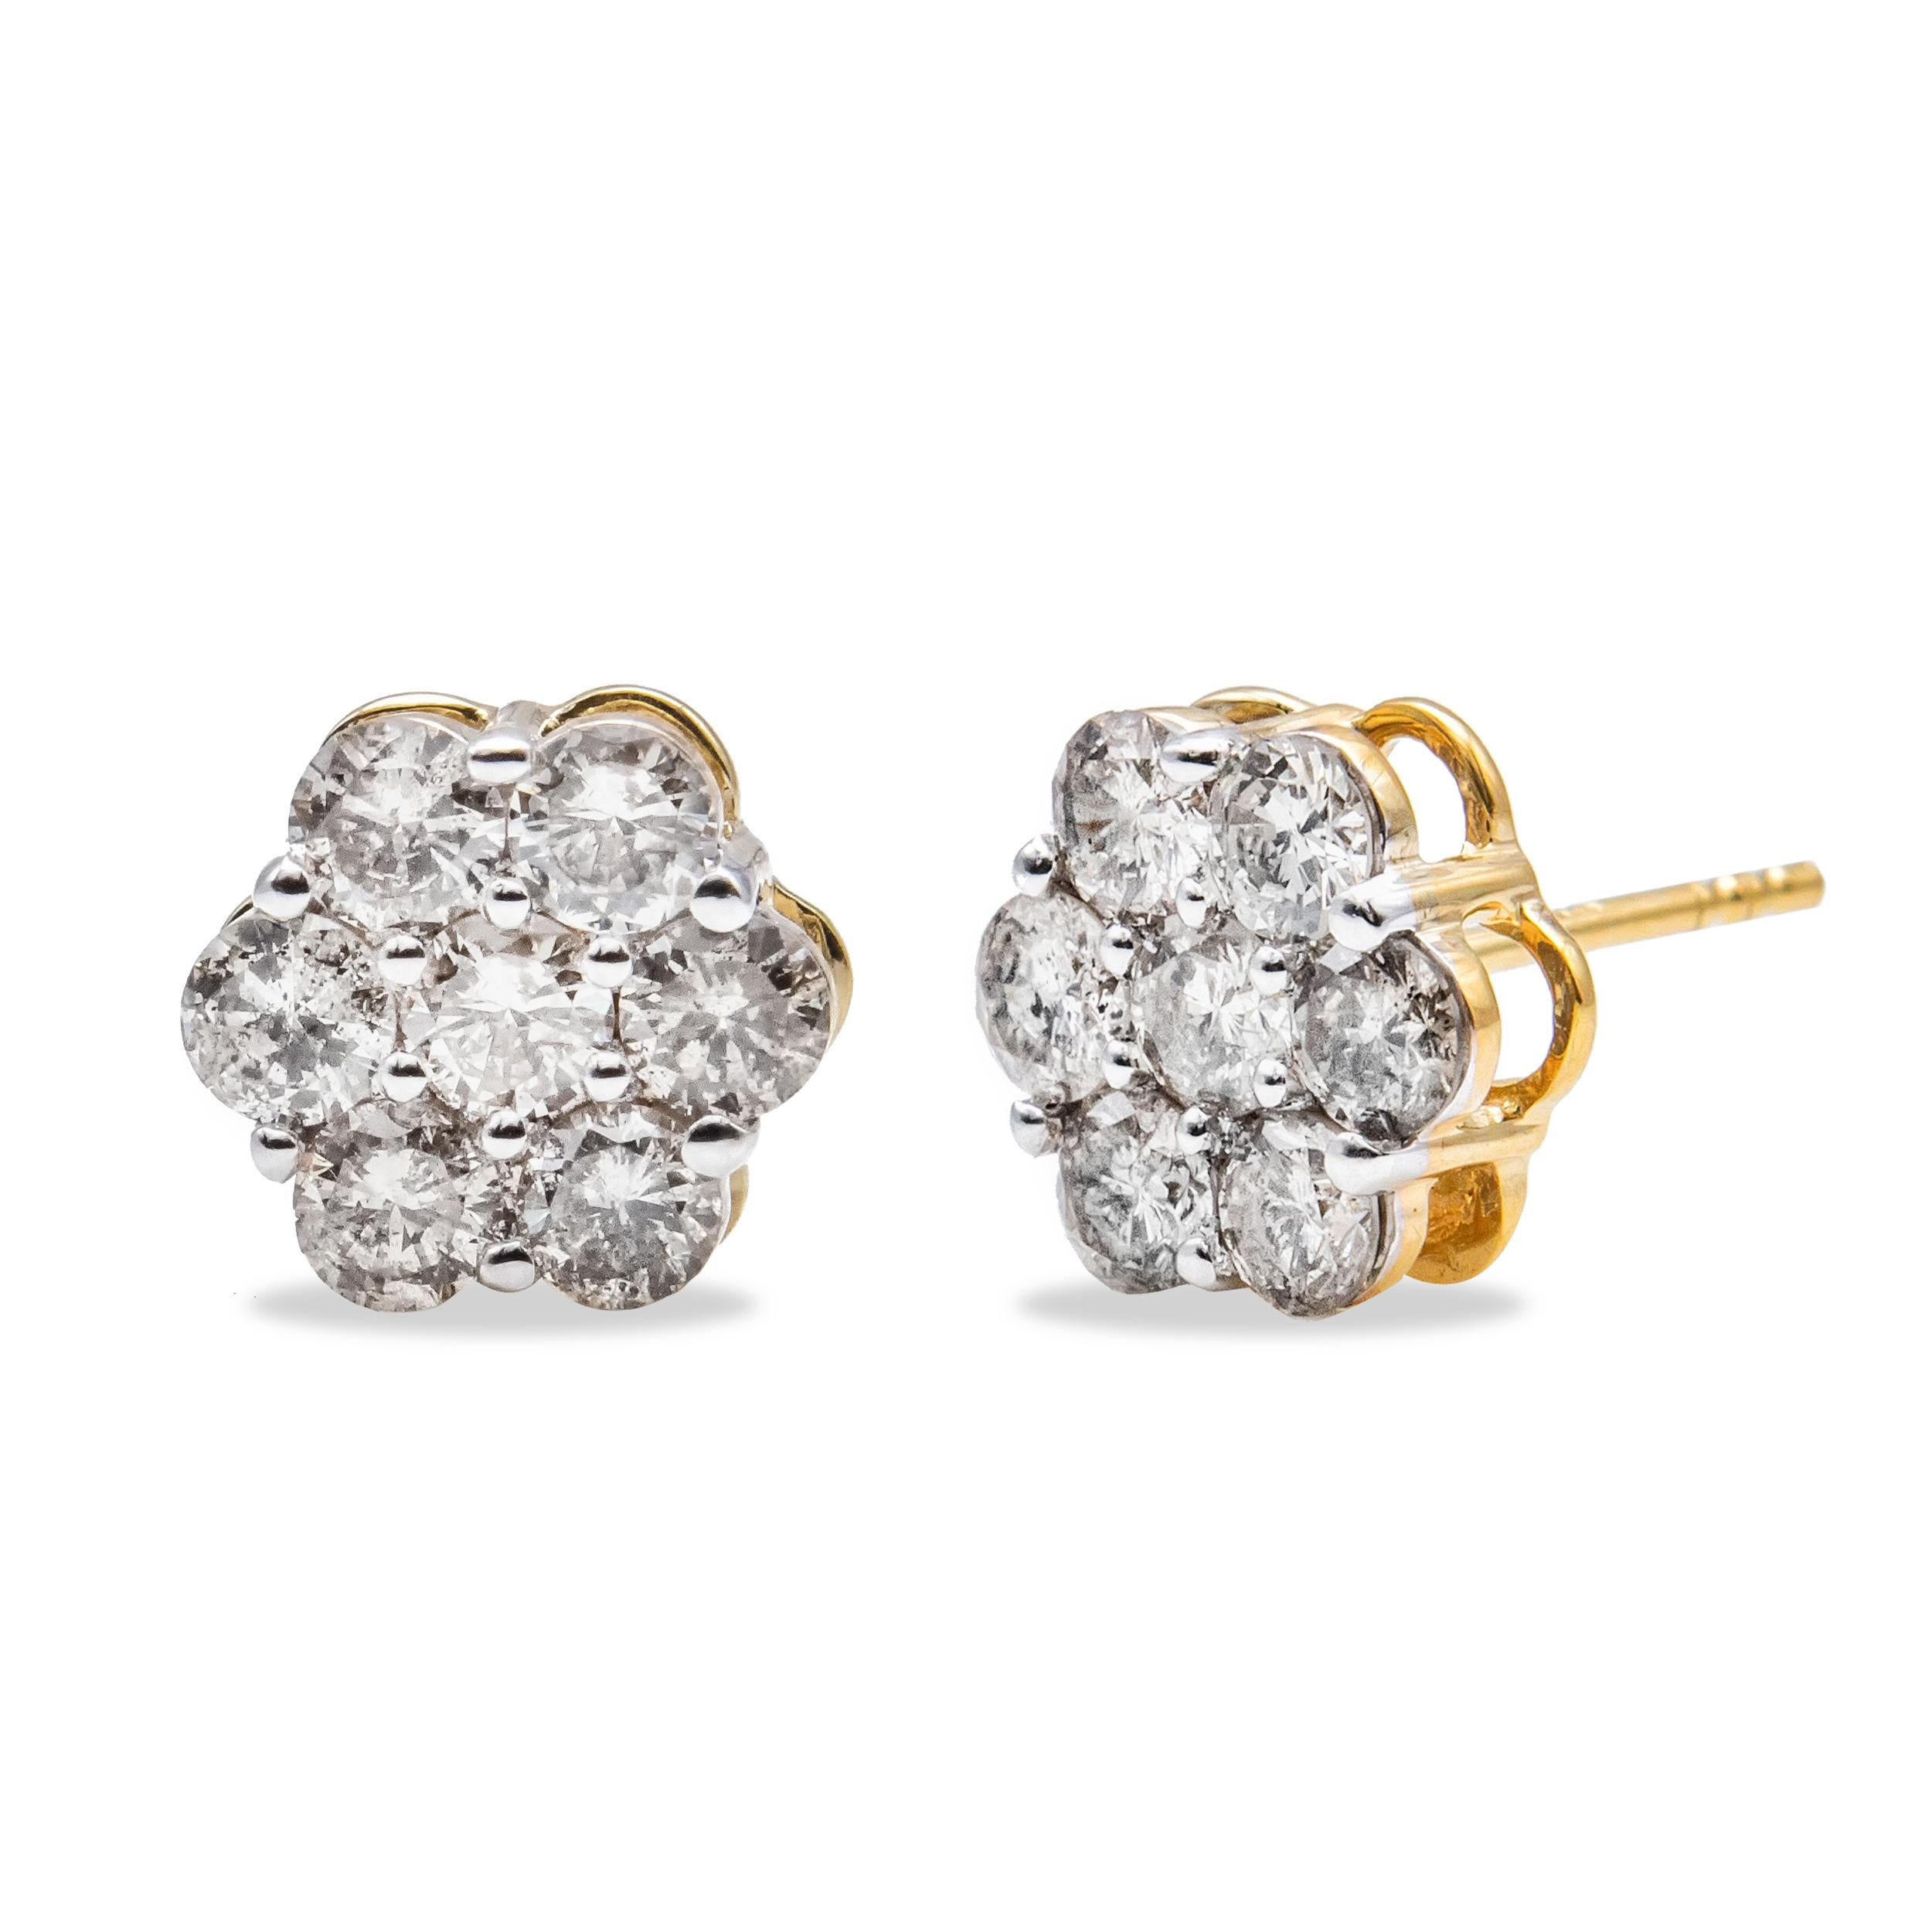 Want to add a touch of sweet femininity to your daily ensemble? These floral cluster stud earrings might just be the jewelry you need. Made up of 14 natural round shape diamonds (seven on each side), the stunning pair feature stones in prong setting